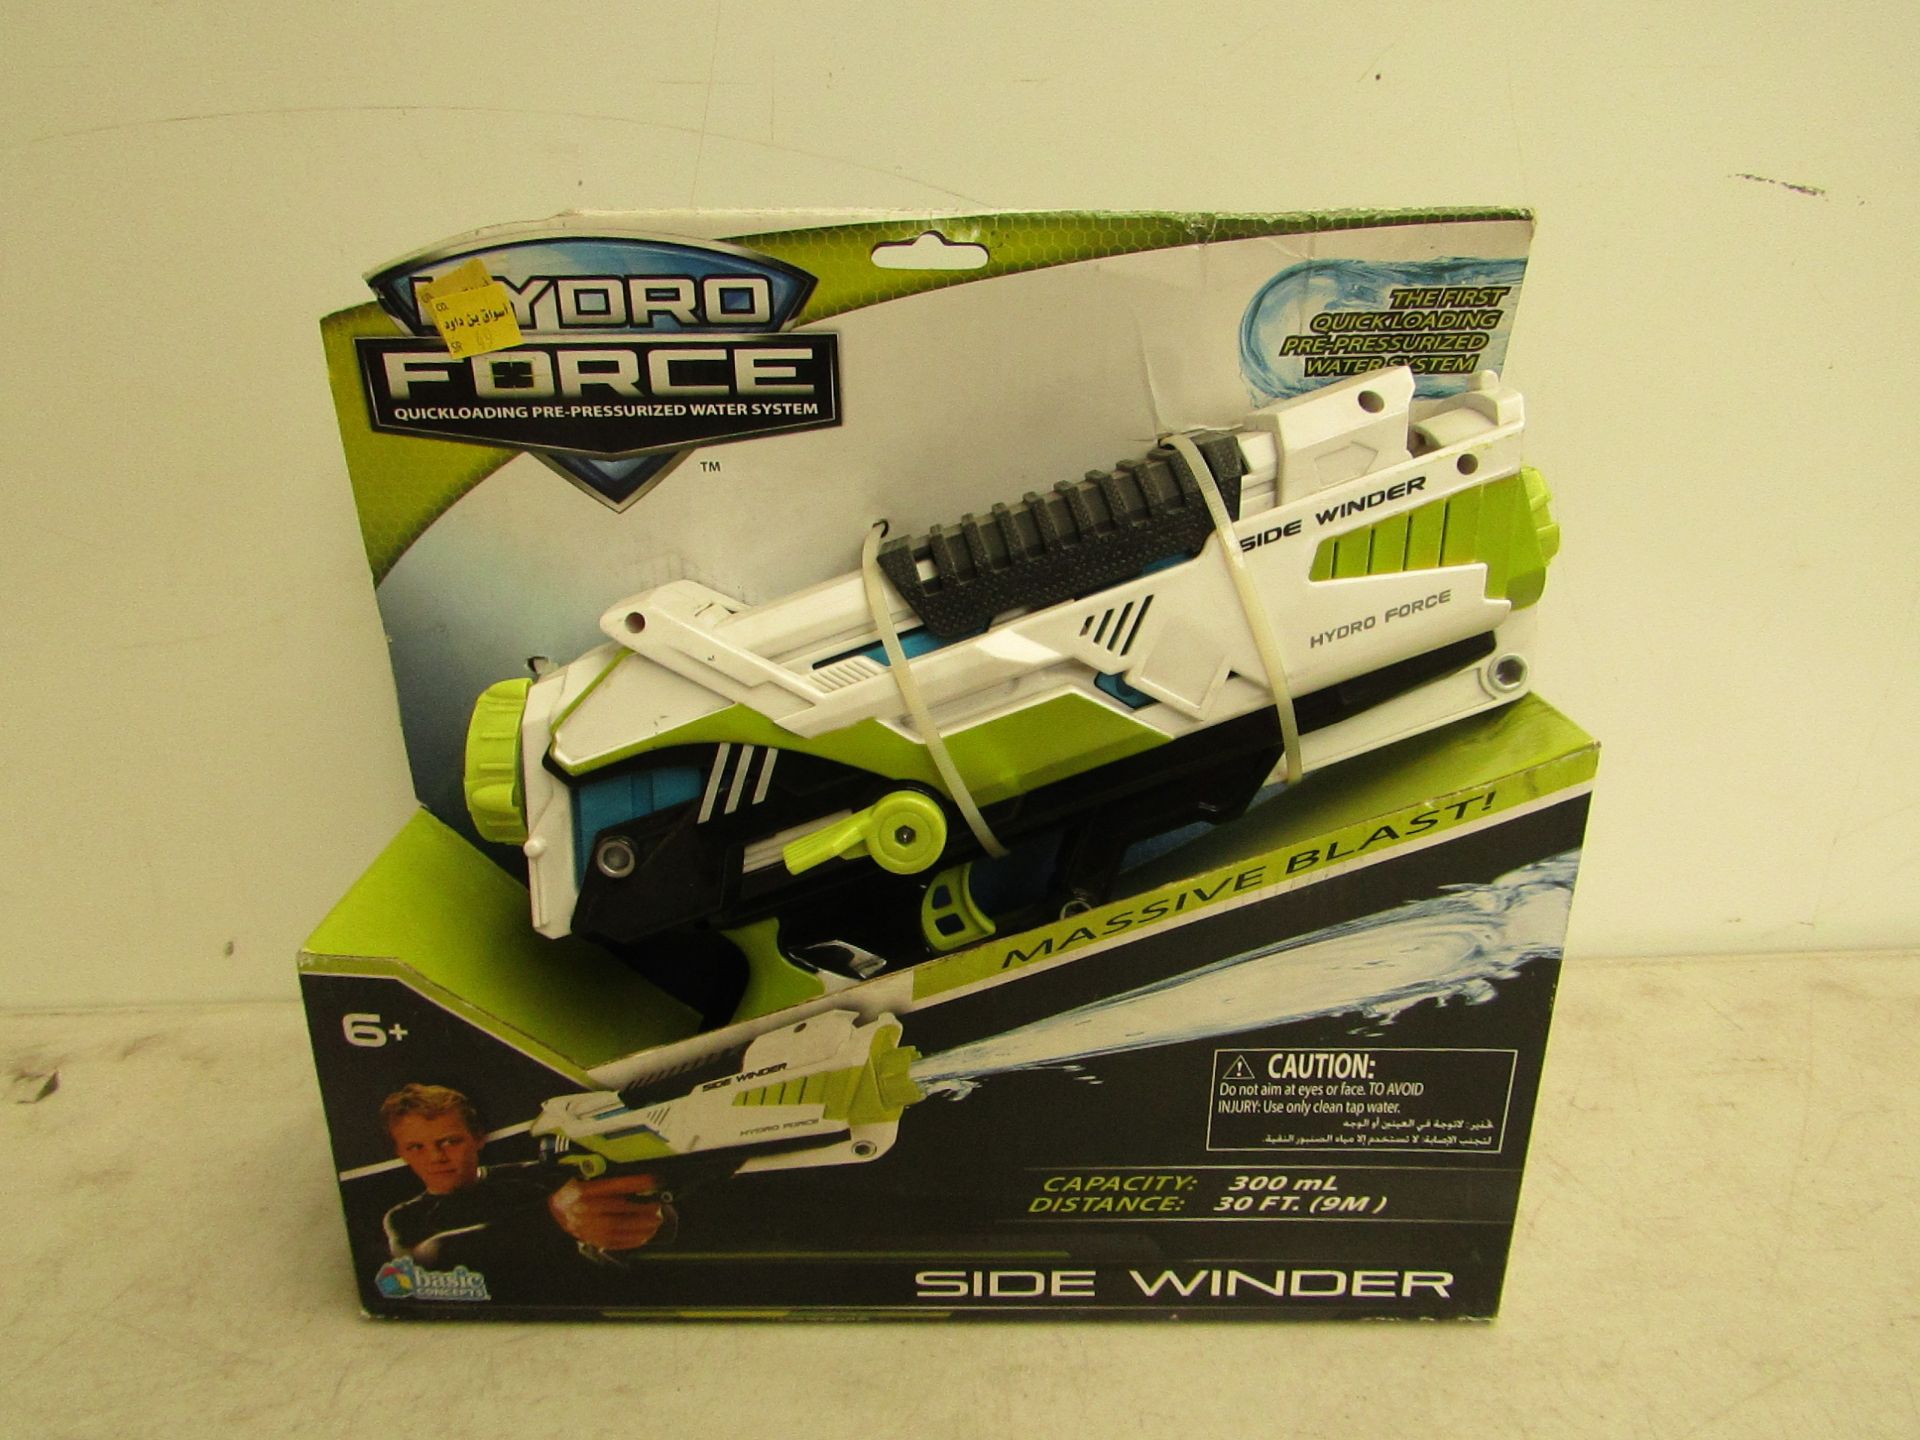 Hydro Force Side Winder, quick loading pre-pressurized water system, new and boxed. RRP £20 on Ebay.